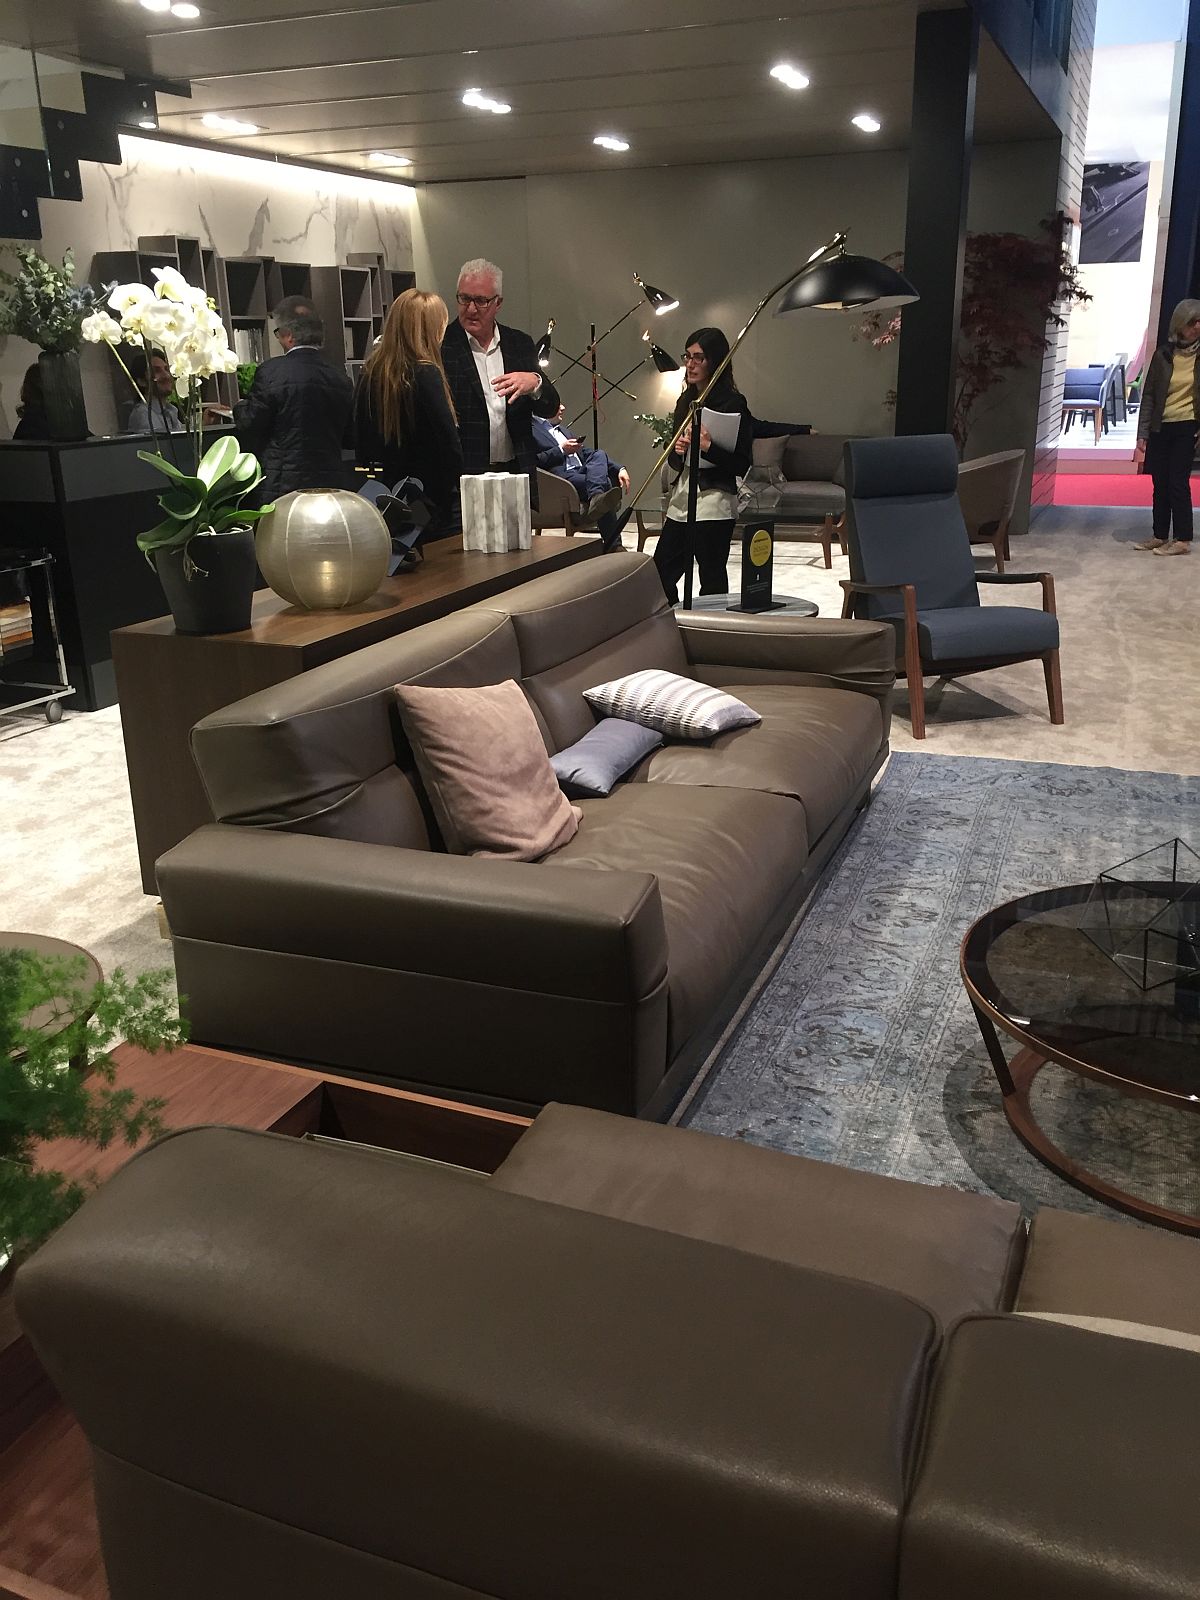 Finding the sofa of your dreams at Salone del Mobile 2016 can be an overwhelming task indeed!